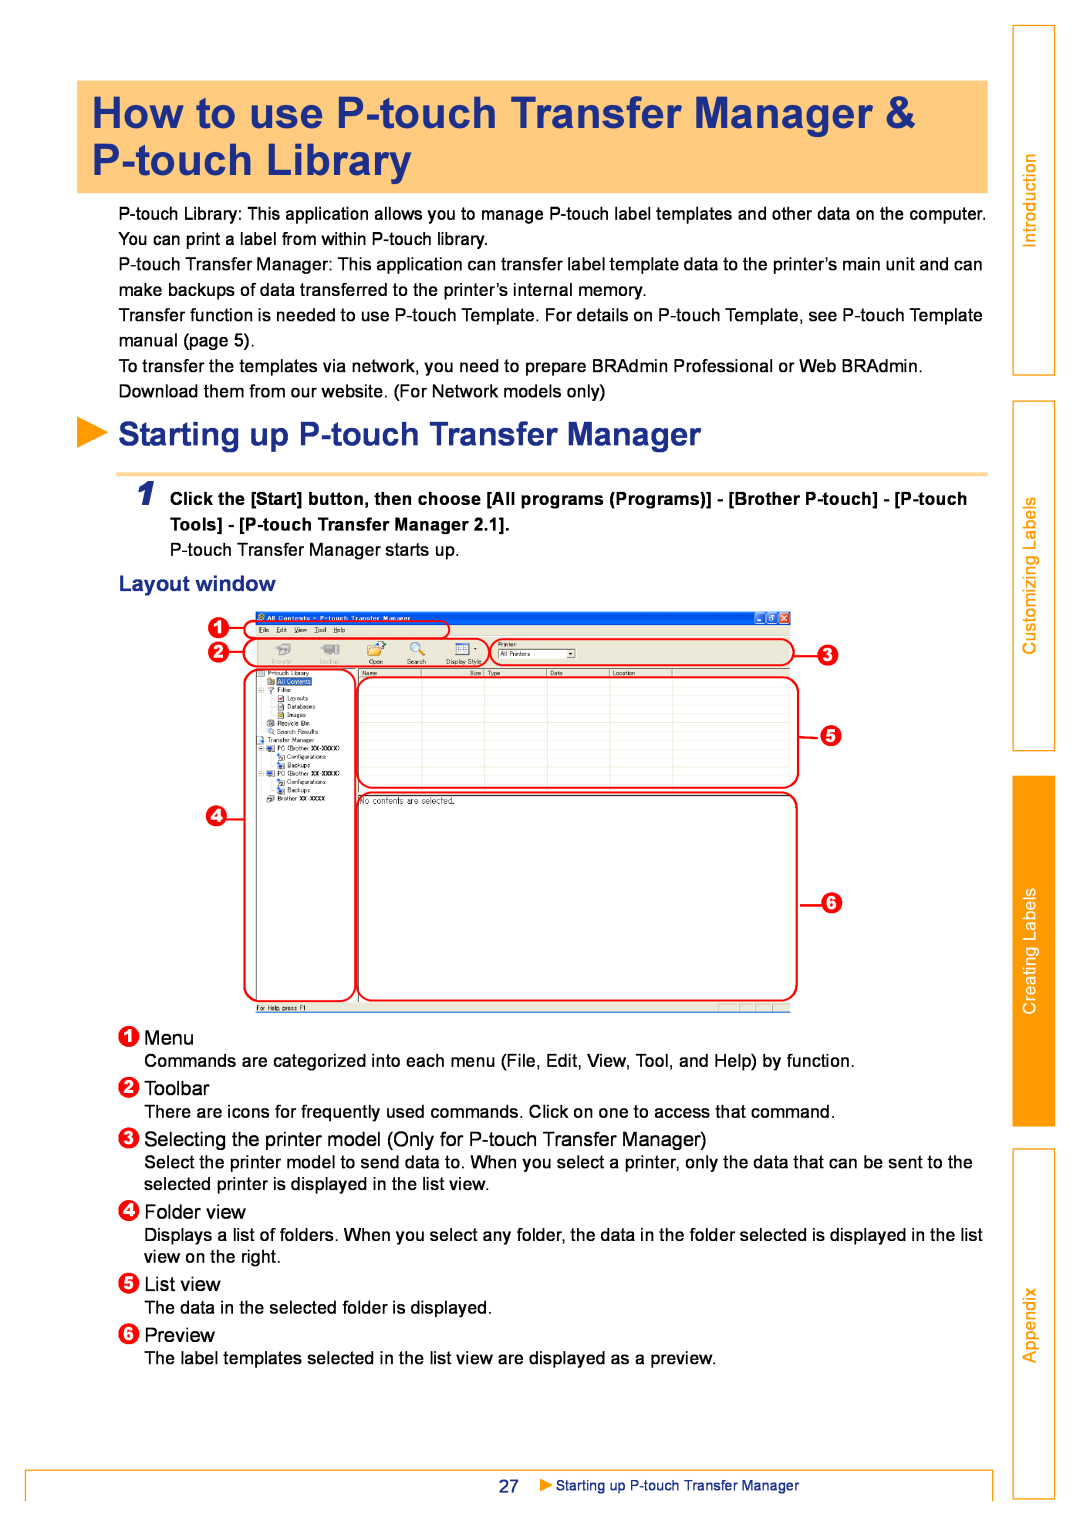 Brother TD-4000 How to use P-touch Transfer Manager & P-touch Library, Starting up P-touch Transfer Manager, Layout window 